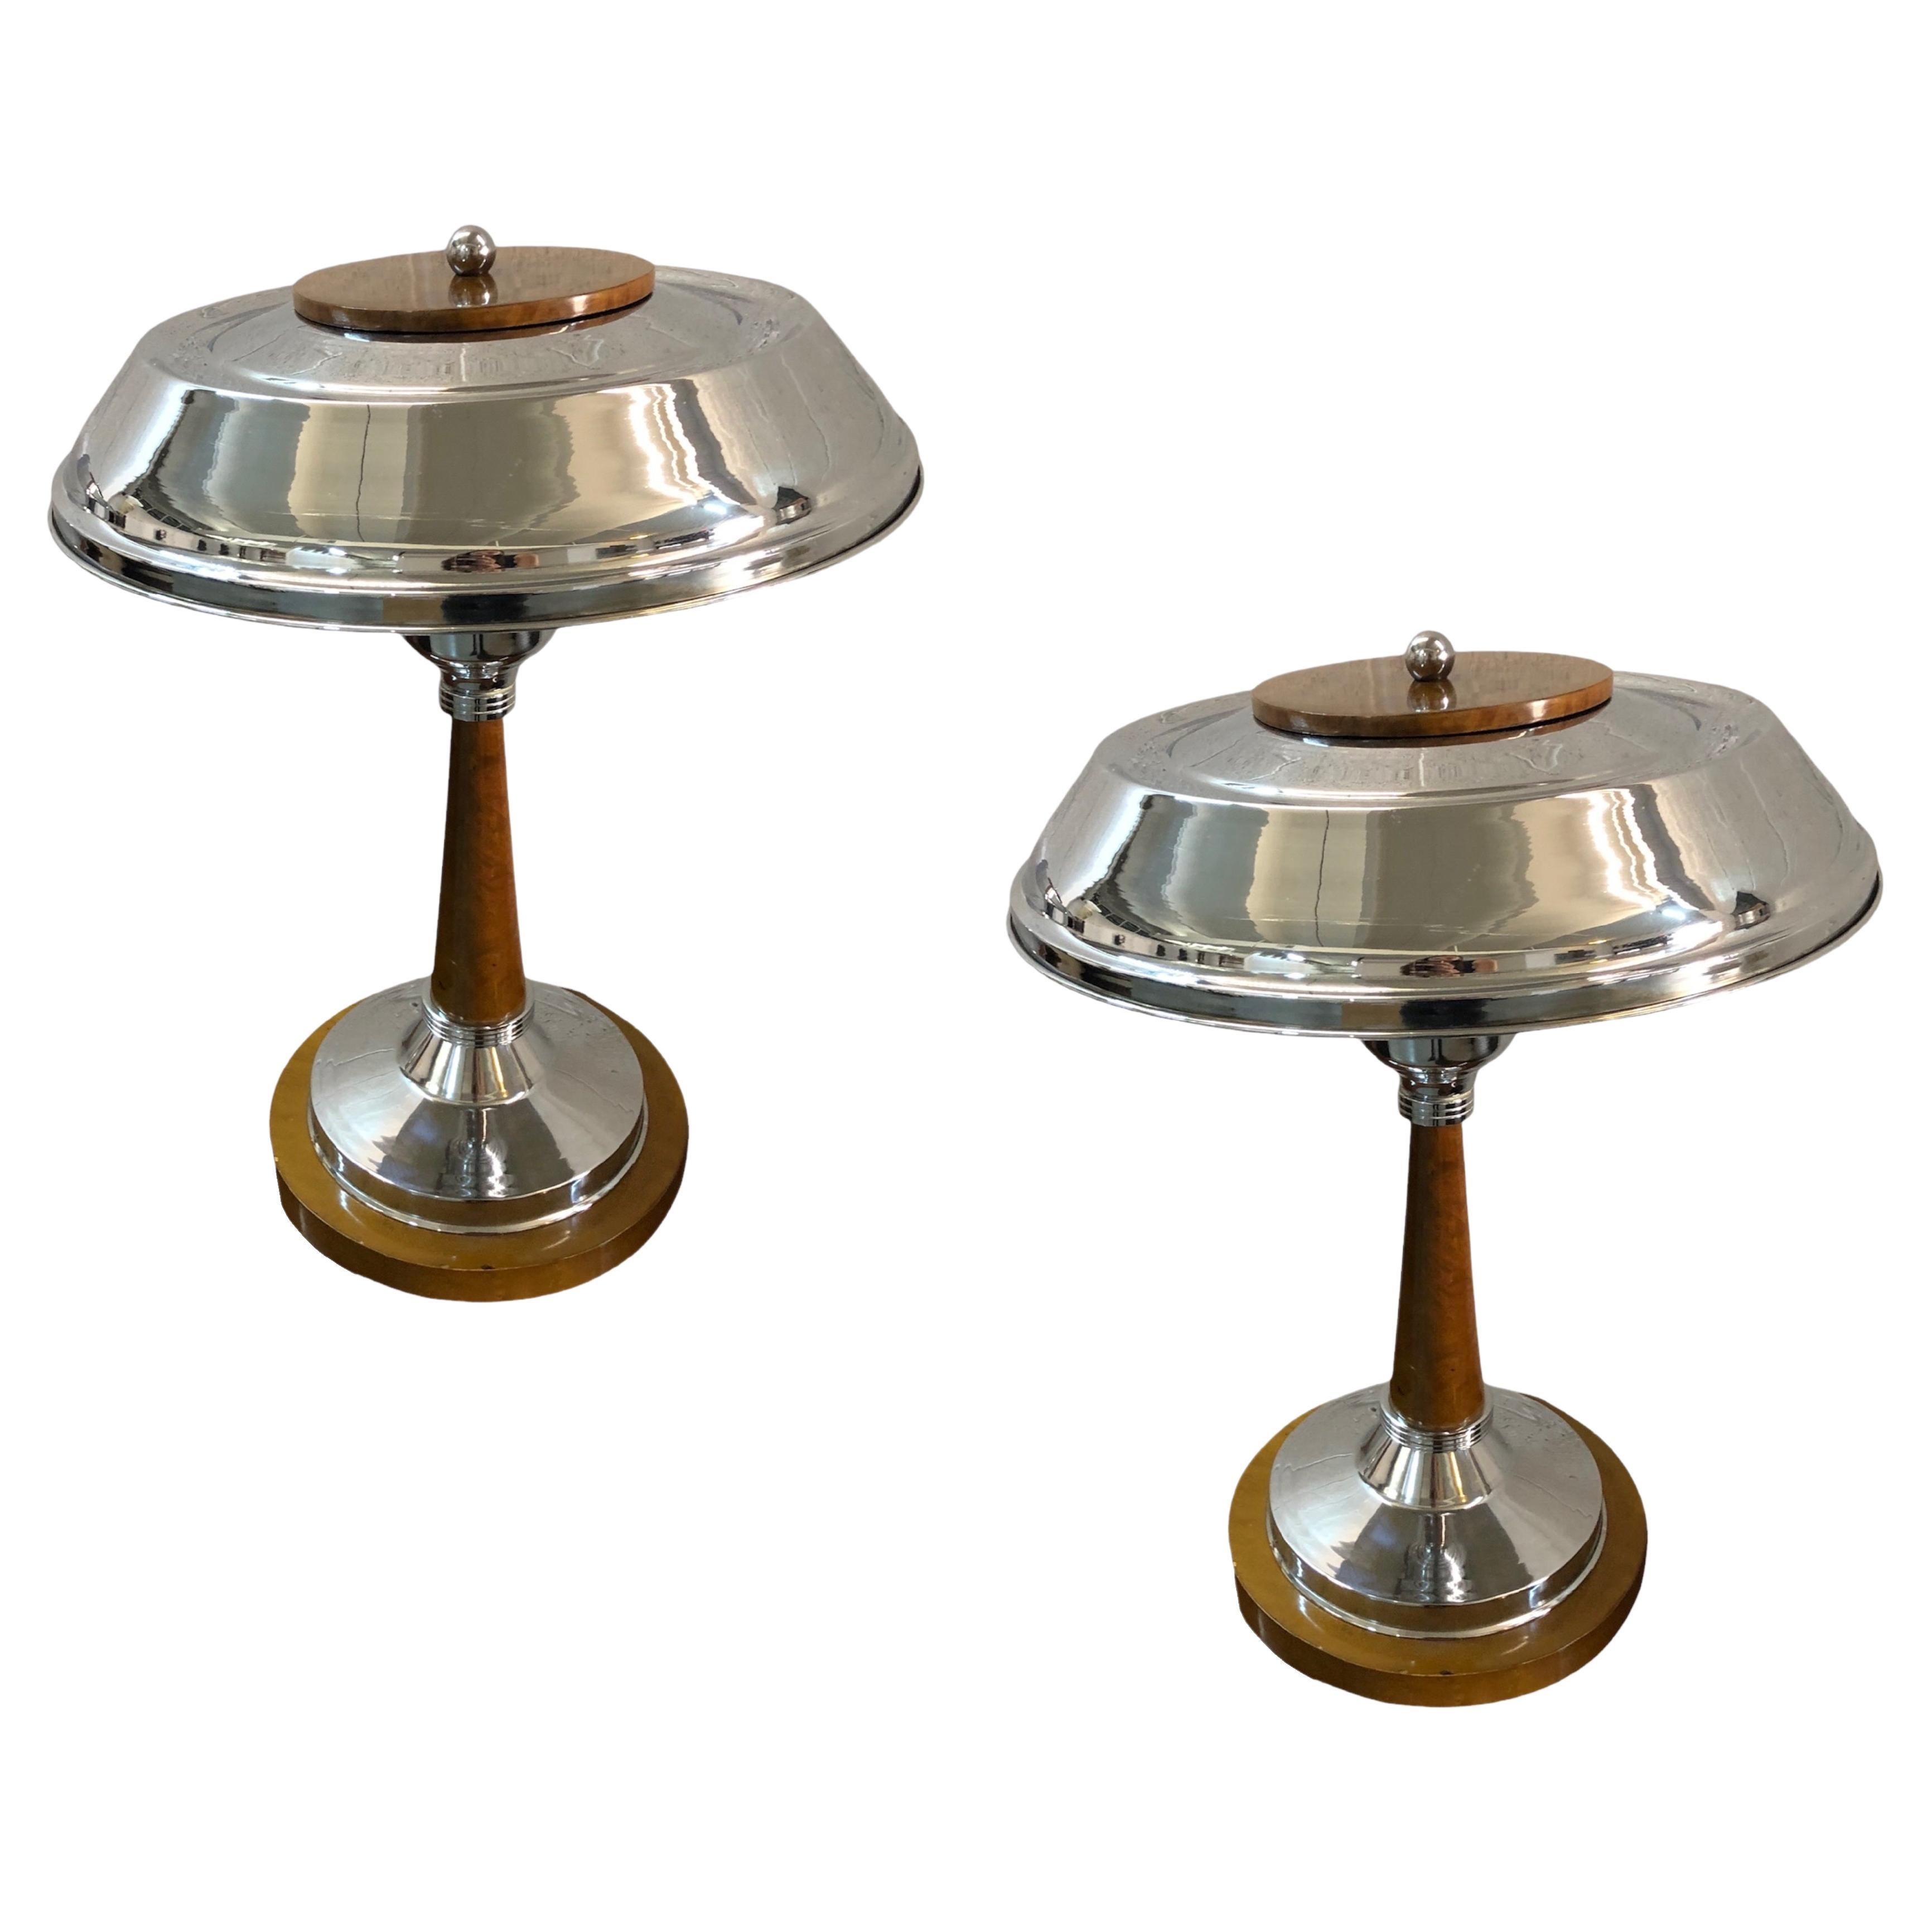 Pair of Art Deco Table Lamps in wood and chrome, 1920, France